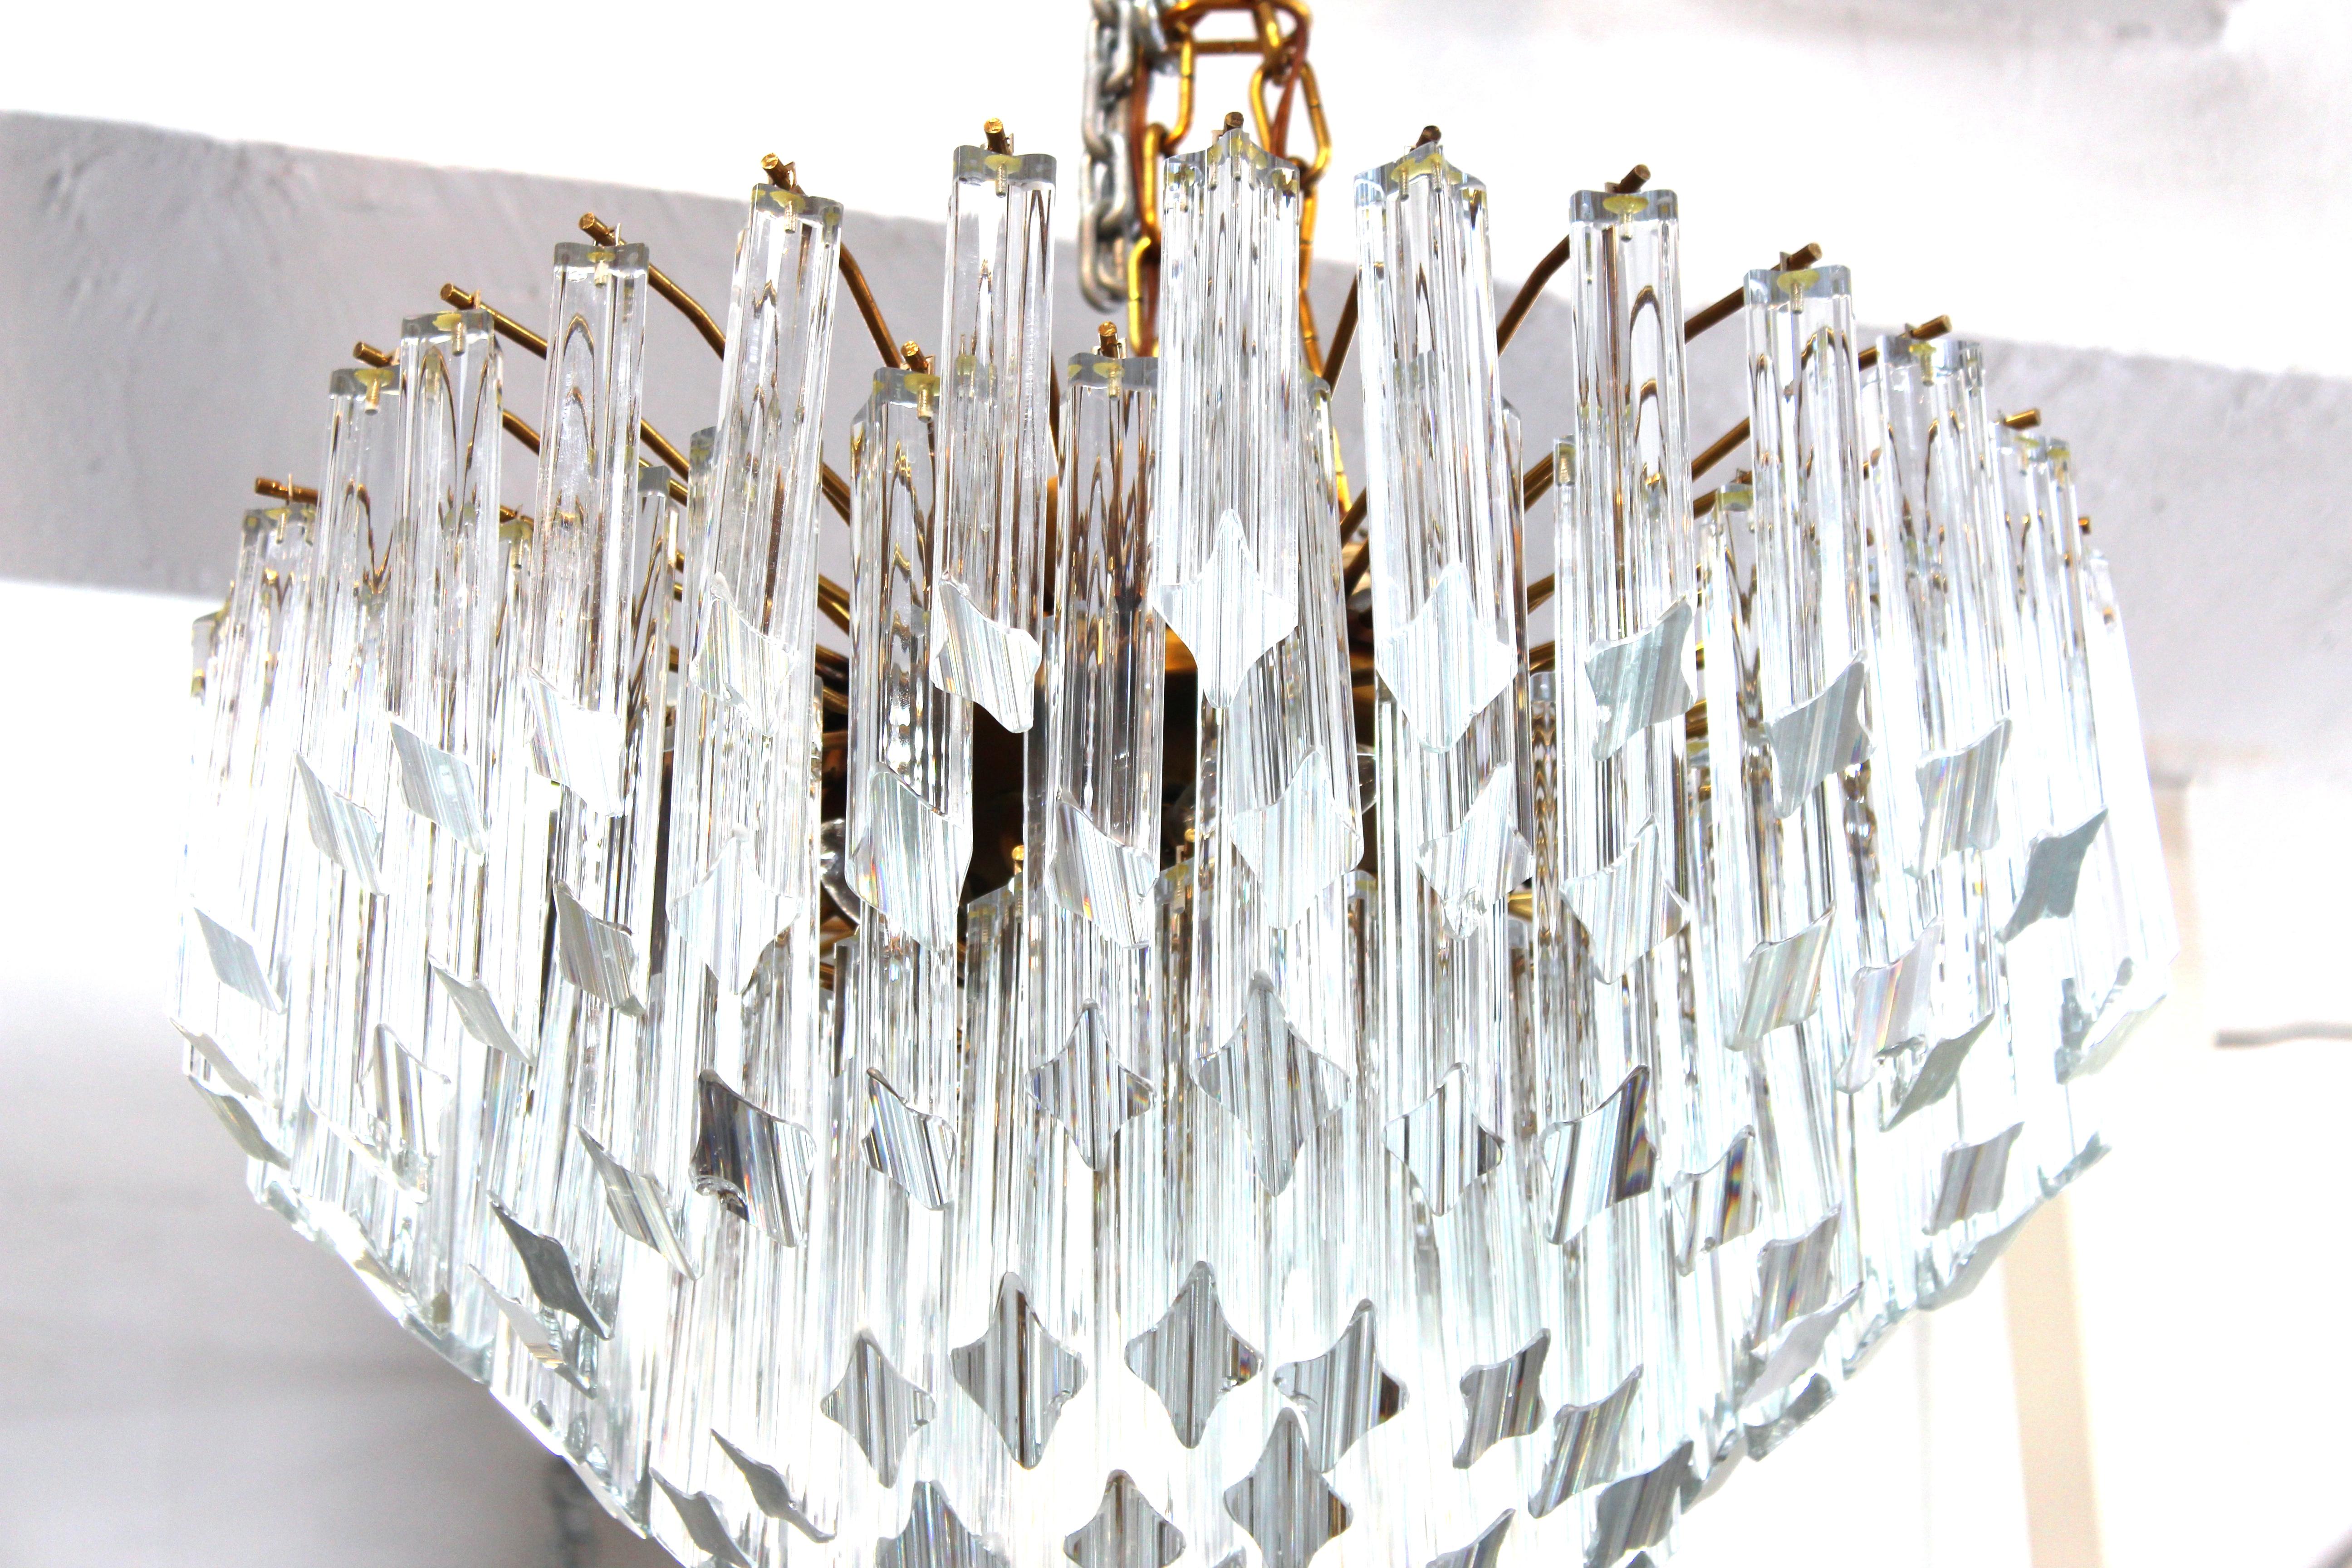 Mid-Century Modern Italian Venini 'cake' chandelier made of descending stacked layers of quadriedri prisms. The piece was made in Italy during the 1960s-1970s and is in great vintage condition. Slight clam-shell chips to the lower parts of some